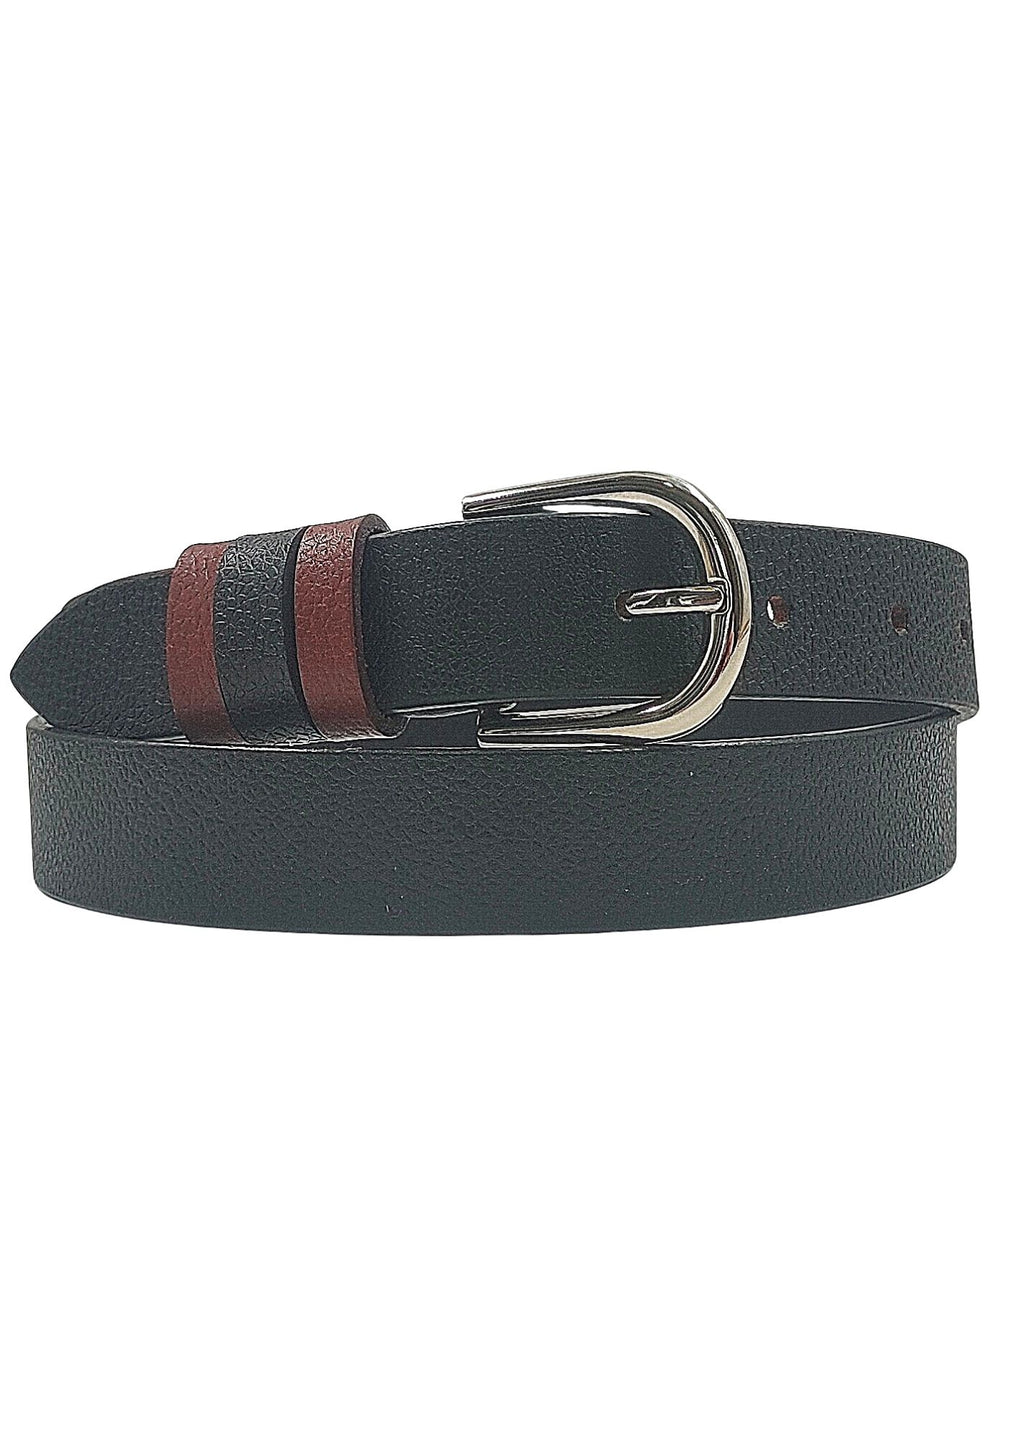 Cross Color Three Loop Leather Belt With Silver Buckle (LB-1021_Black)